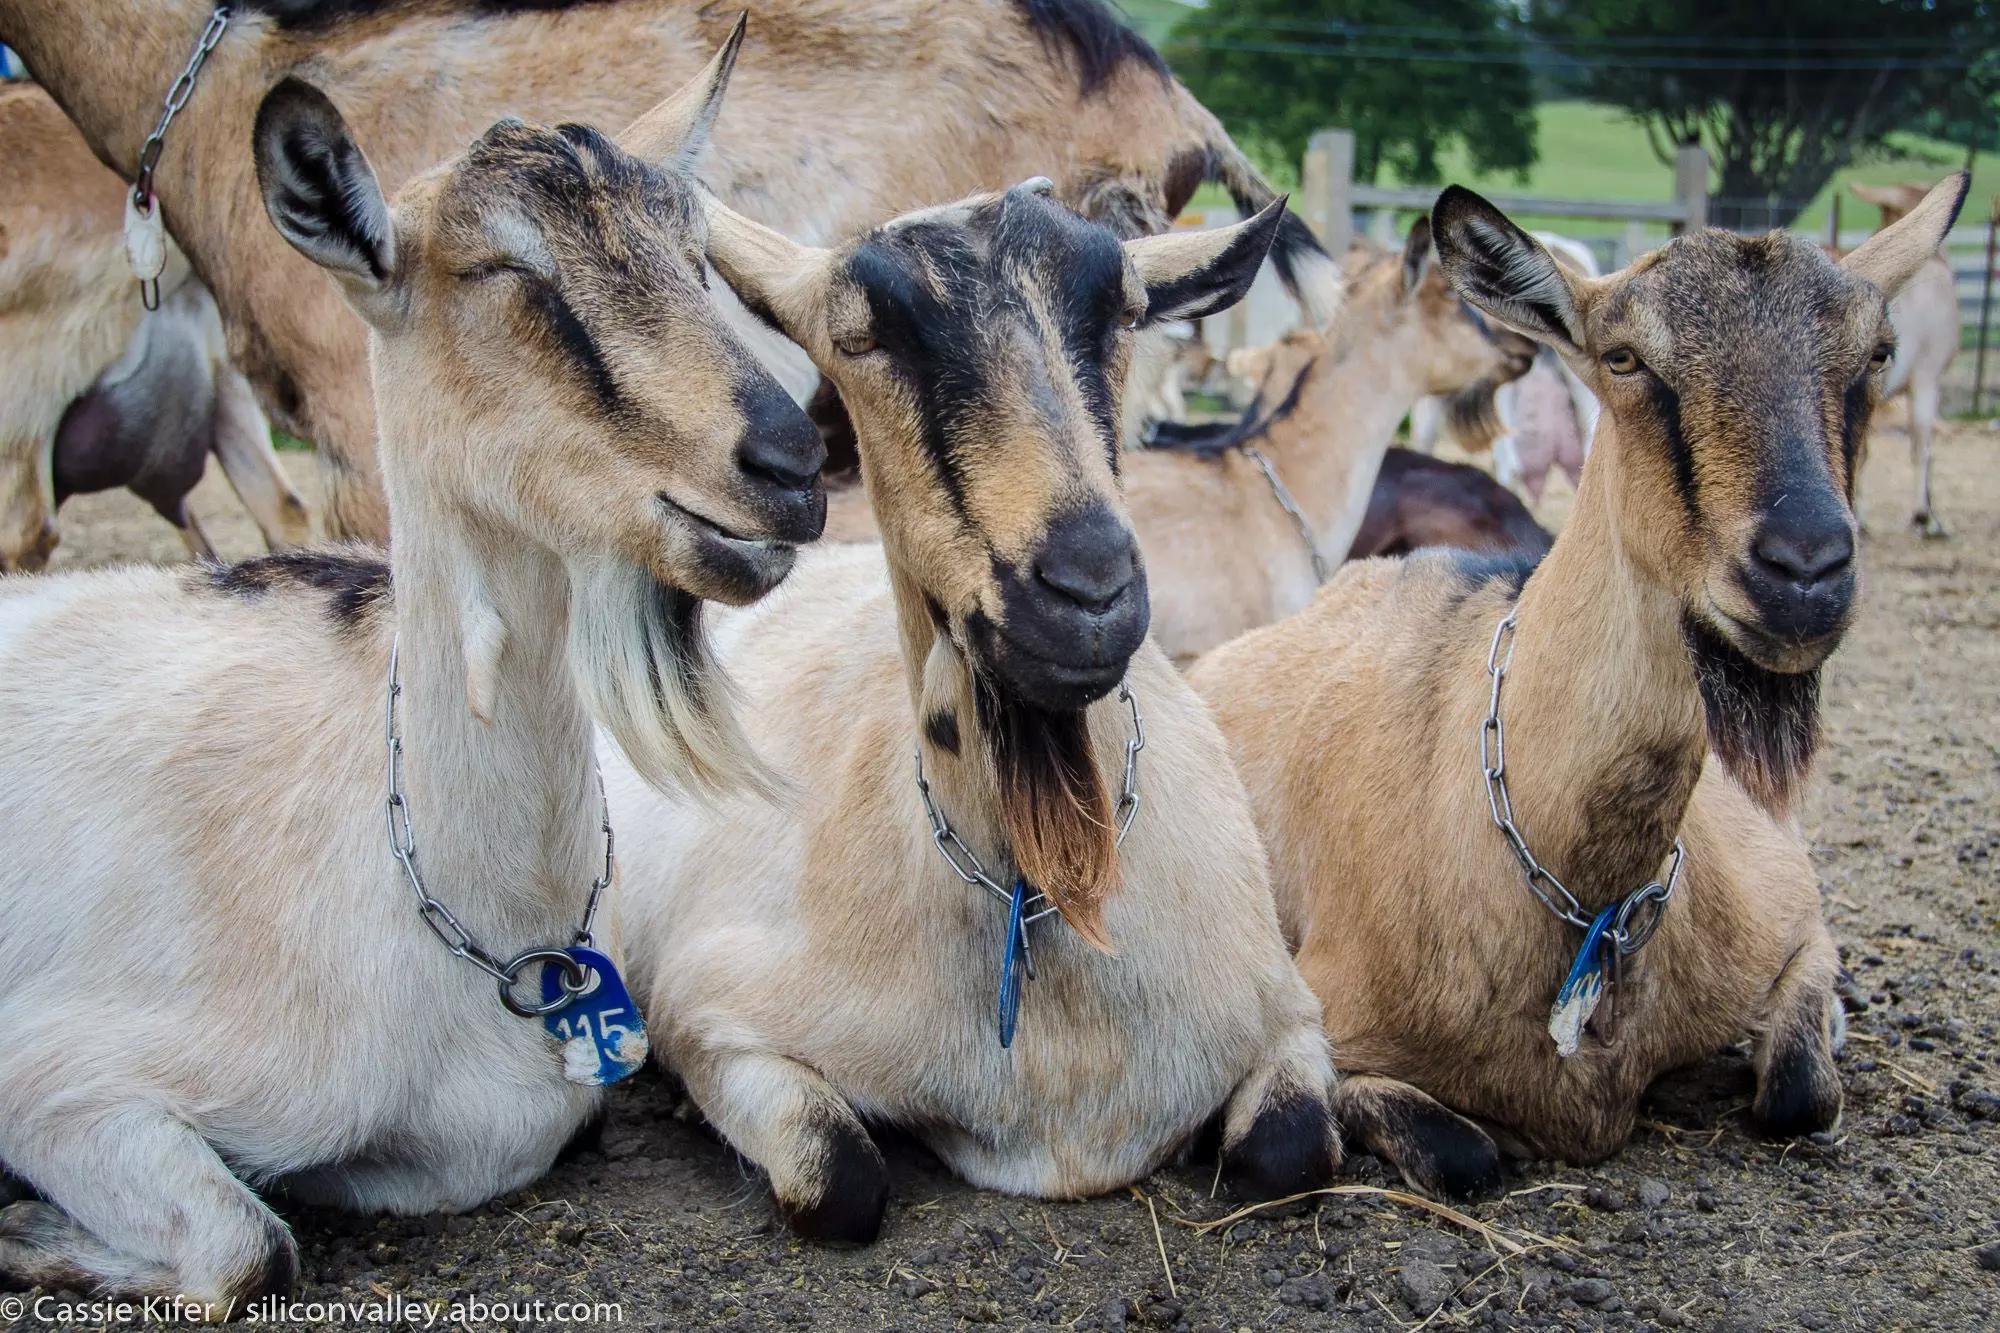 Police arraign 2 men for alleged possession of 6 goats